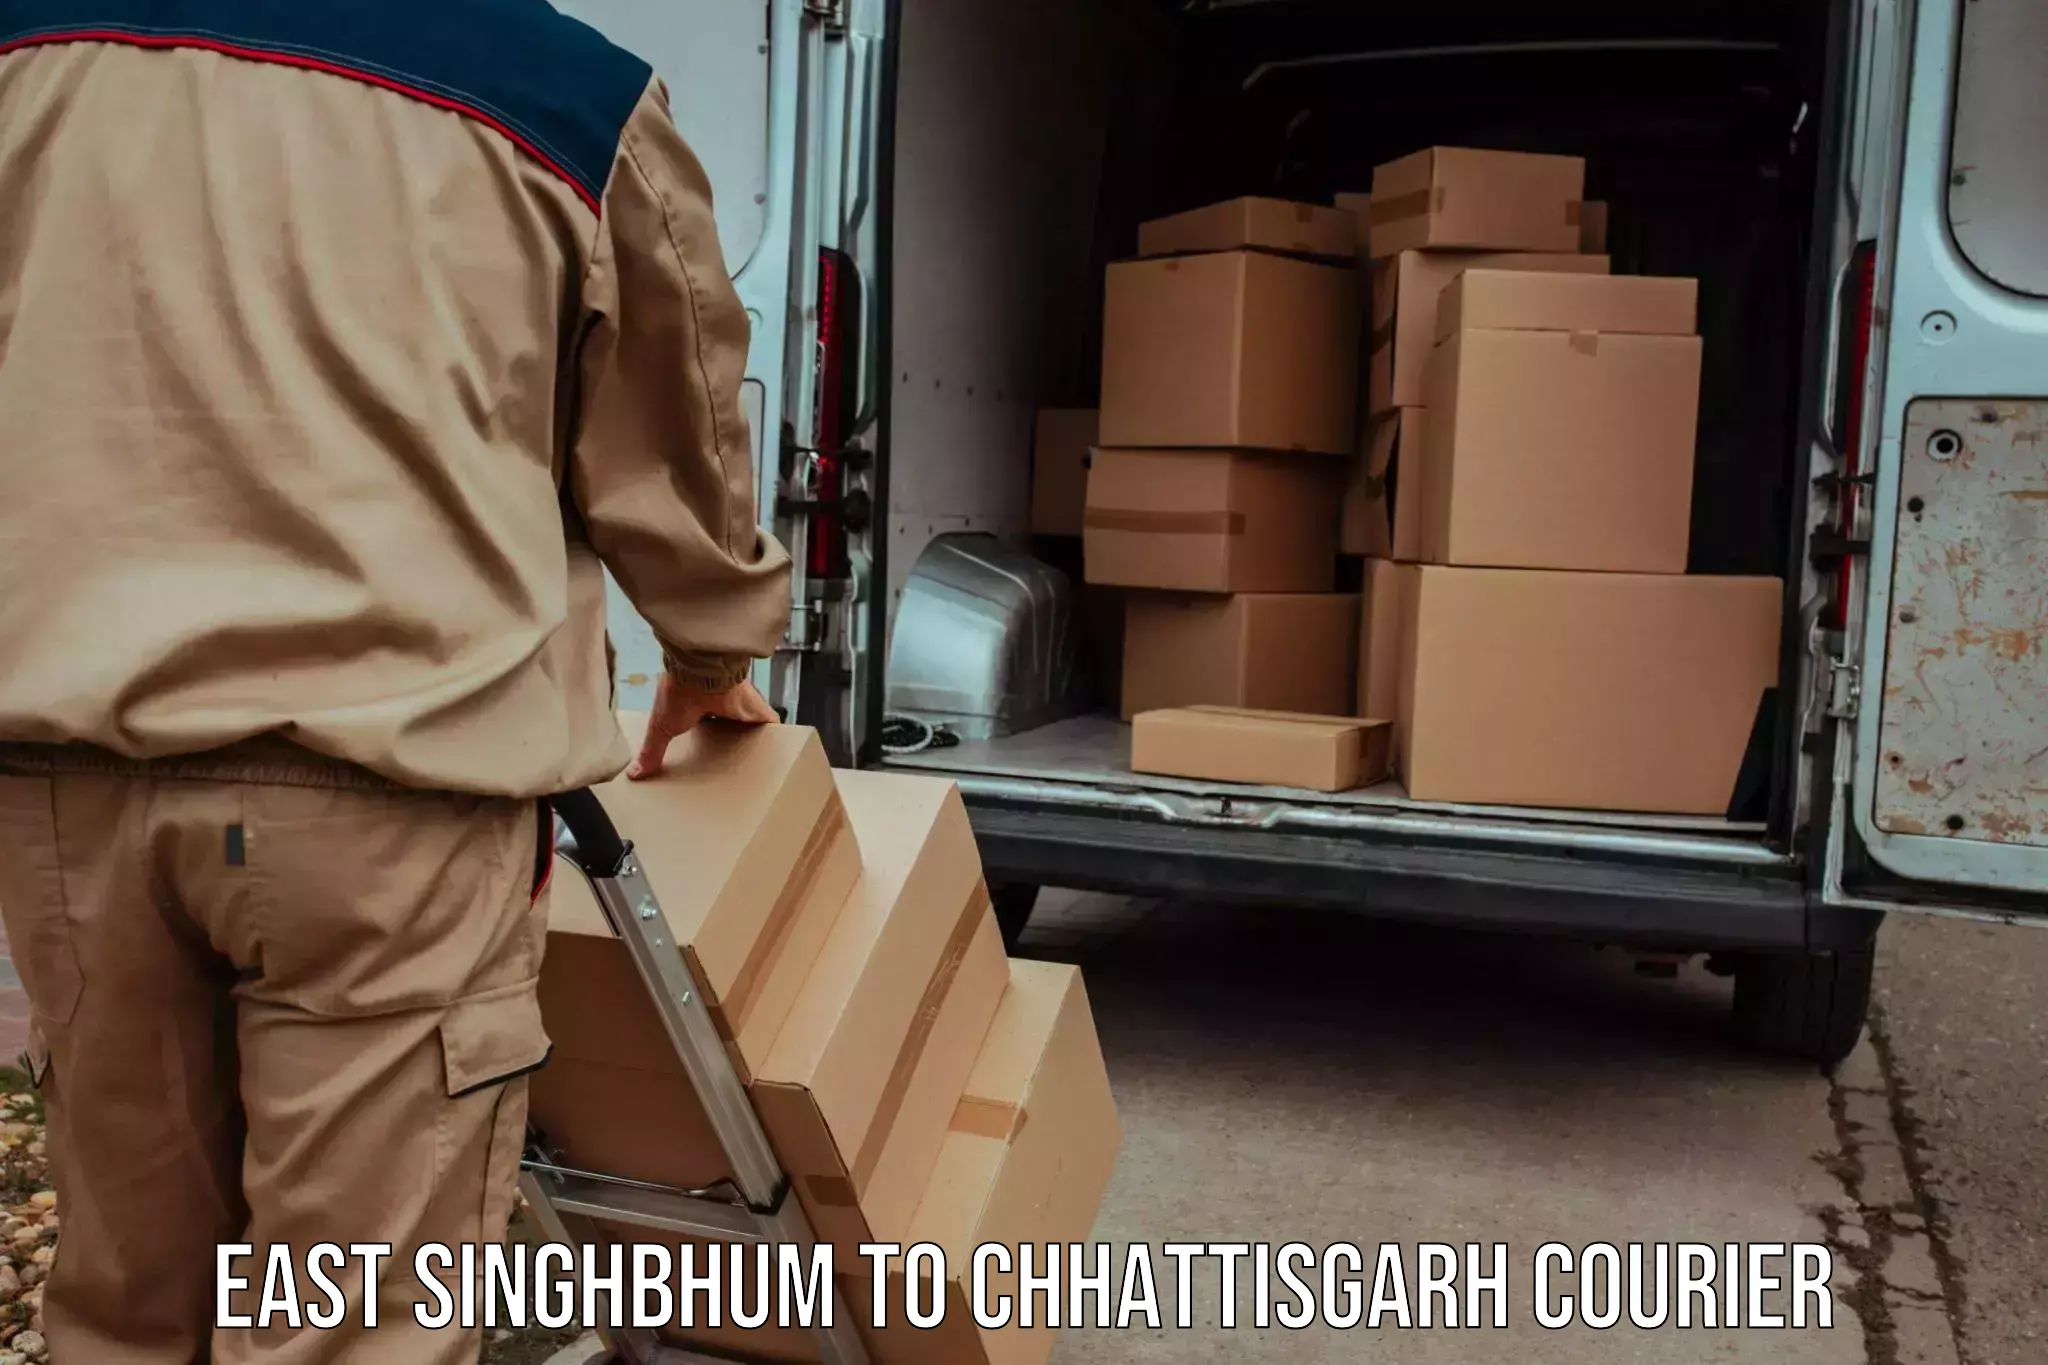 Personal courier services East Singhbhum to Patna Chhattisgarh